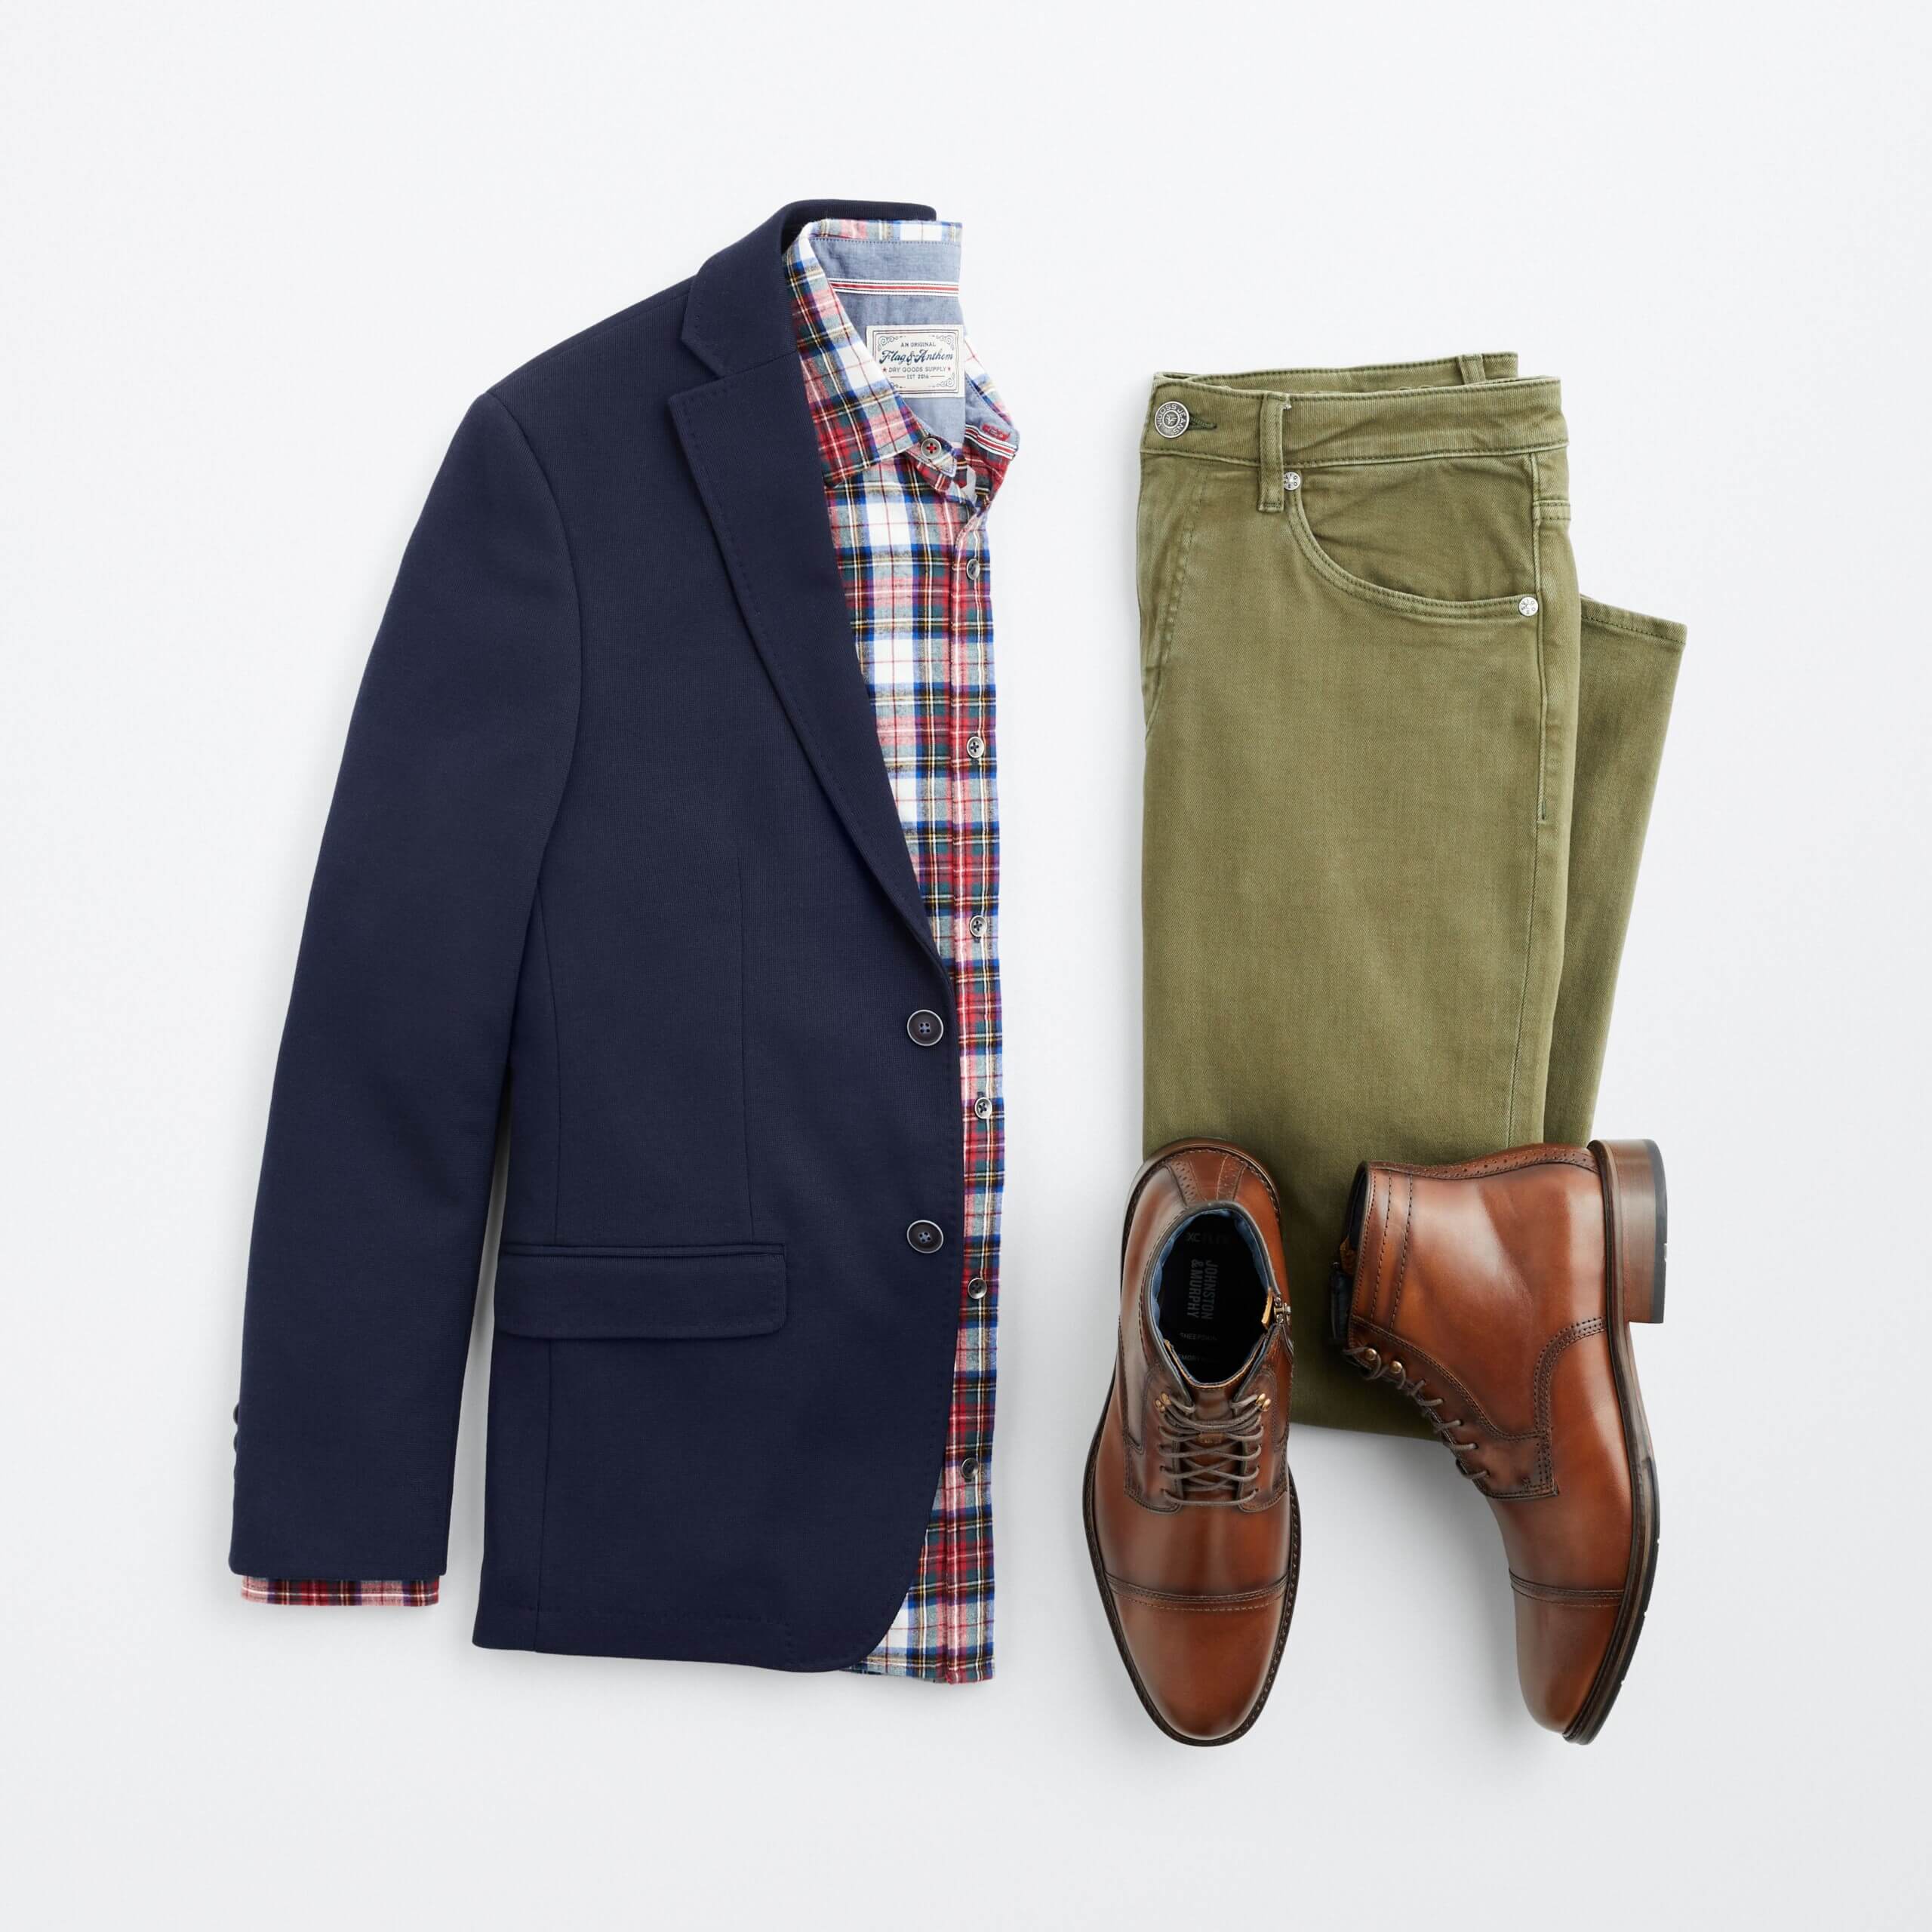 What to Wear for Christmas | Our Men's Style Guide | Stitch Fix